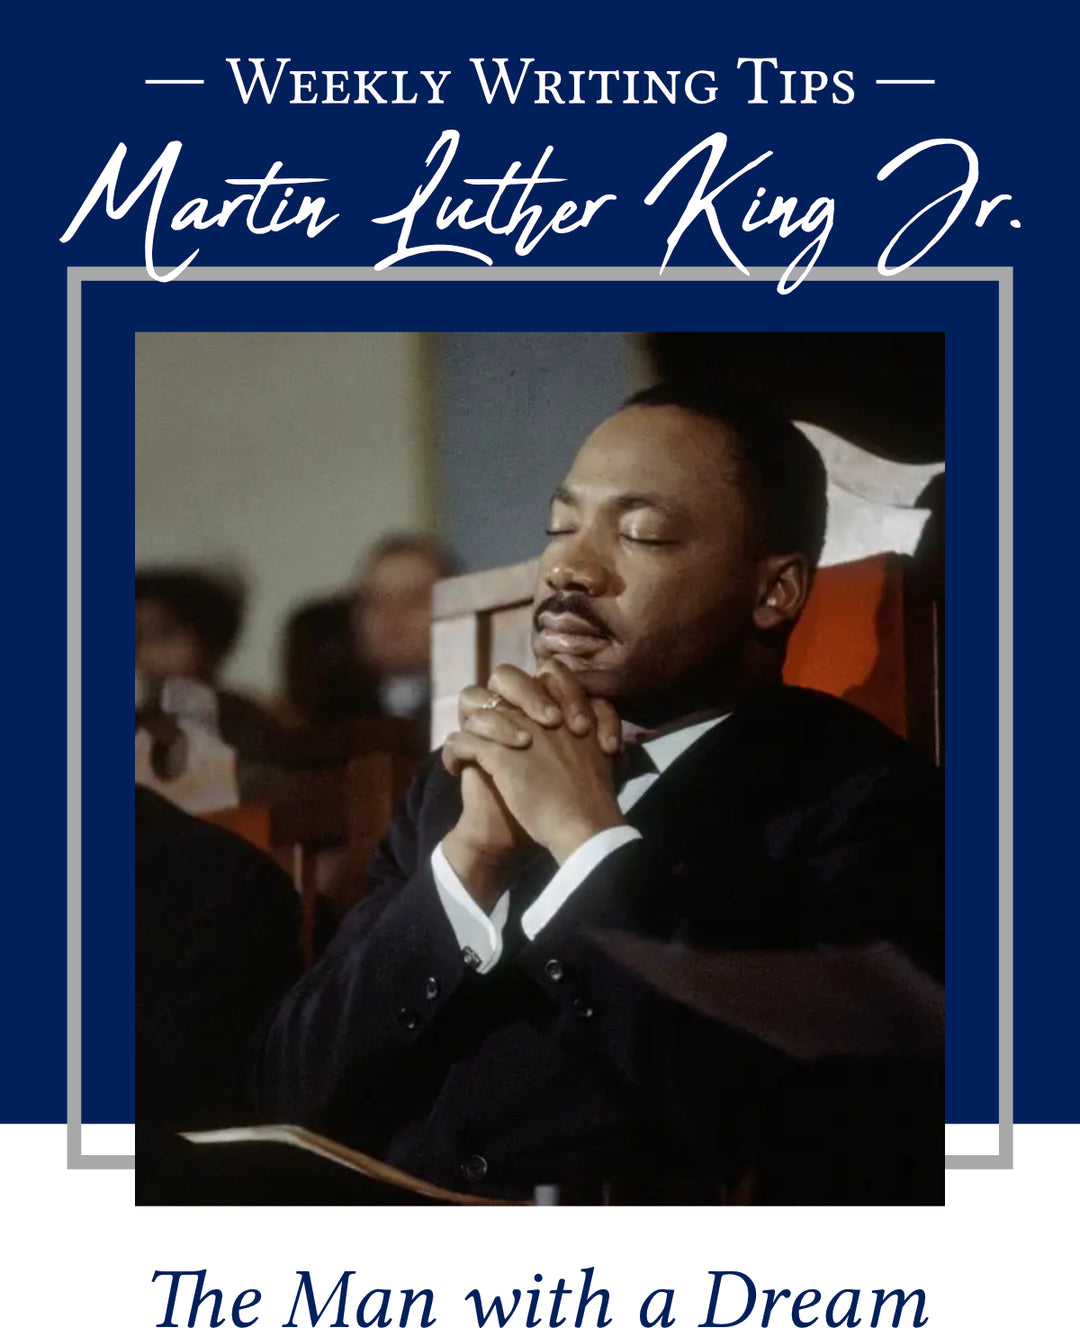 Weekly Writing Tips - Martin Luther King Jr. - The Man with a Dream